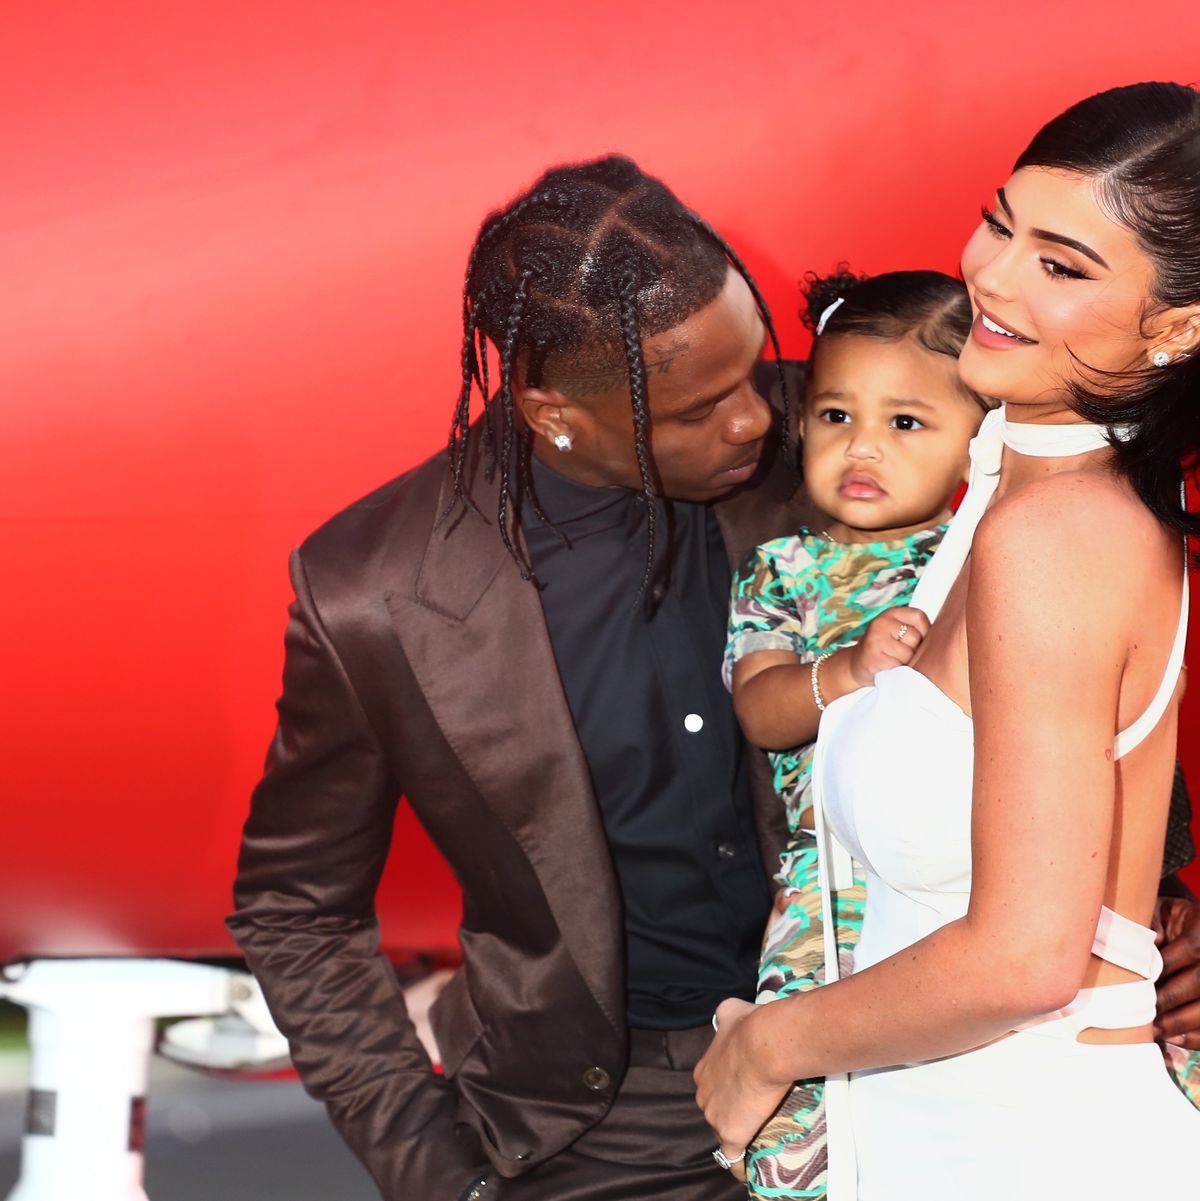 Kylie Jenner is Pregnant With Her Second Child With Boyfriend ...